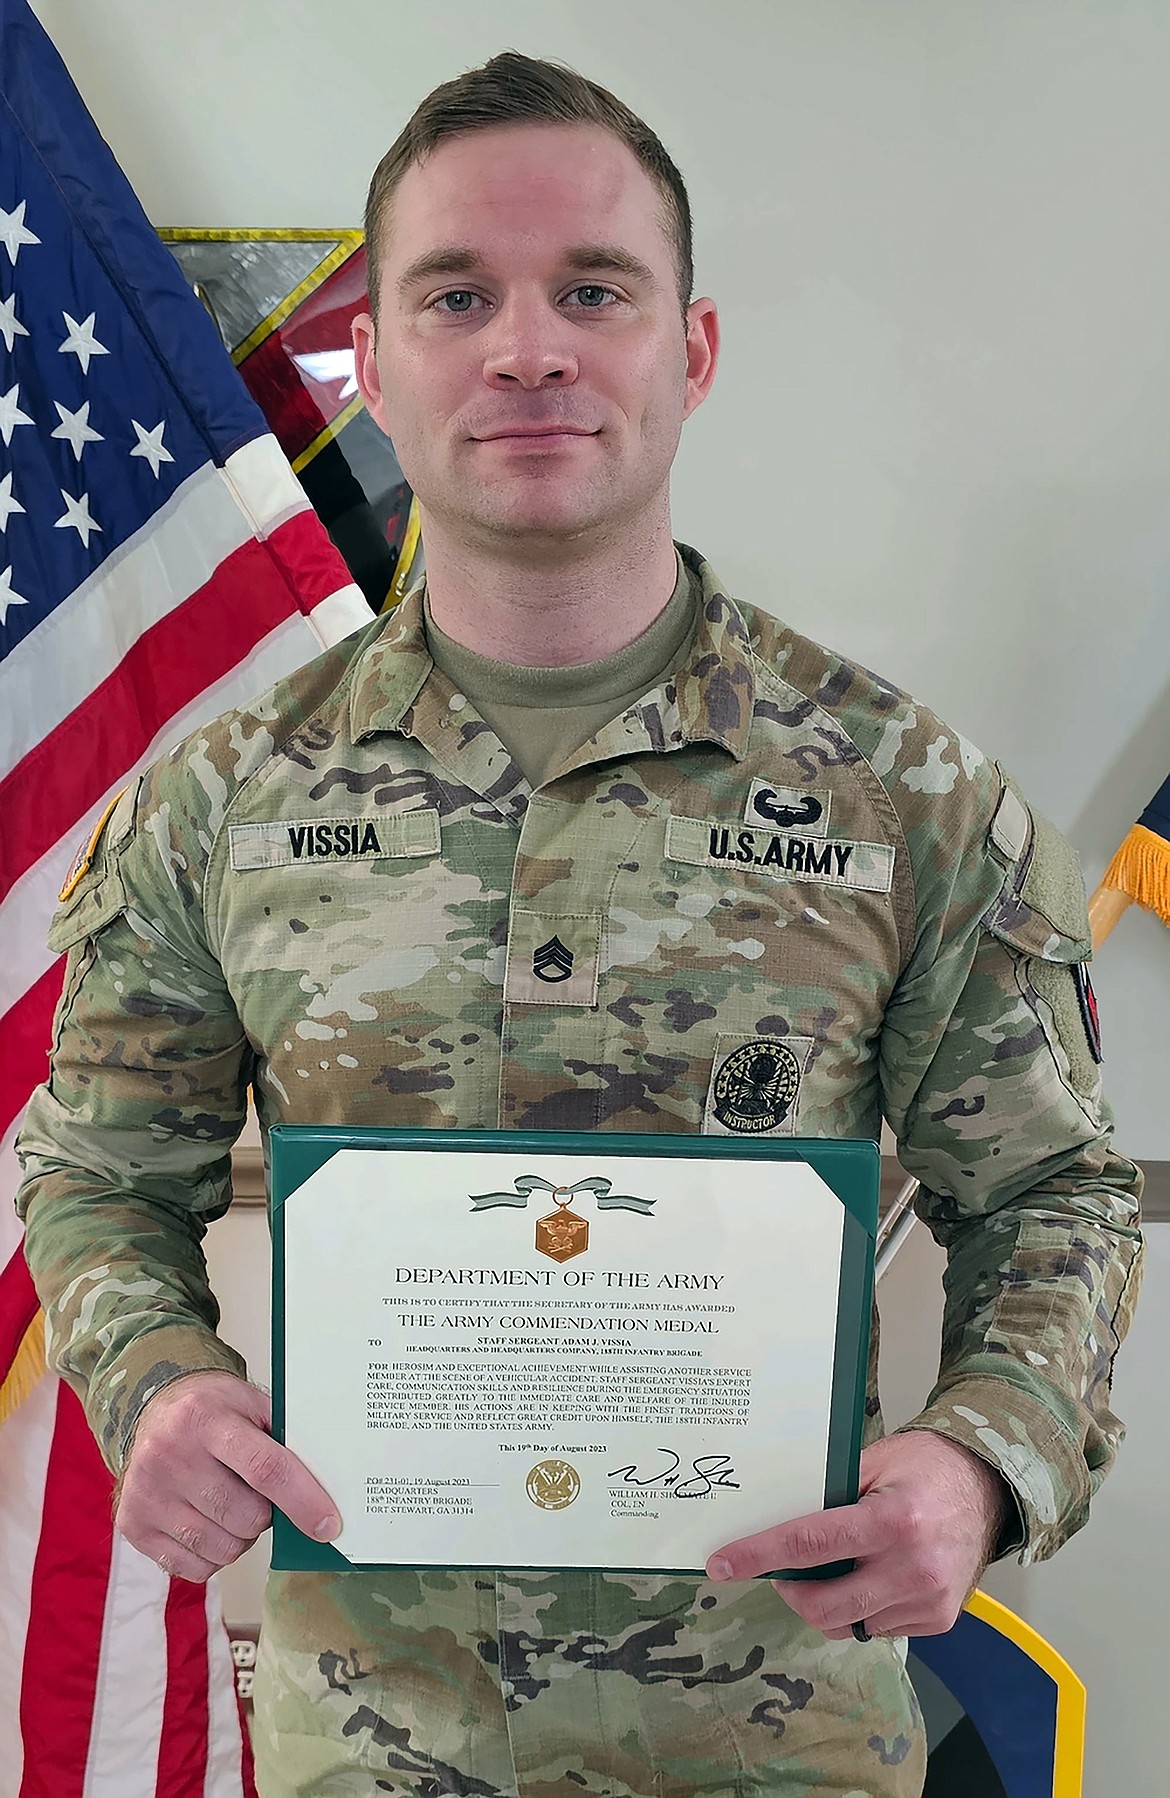 Staff Sgt. Adam Vissia poses for a photo after being presented the Army Commendation Medal at Fort Stewart on Dec. 15. Vissia earned the award after taking heroic action during a vehicle accident in August, resulting in saving a soldier's life.